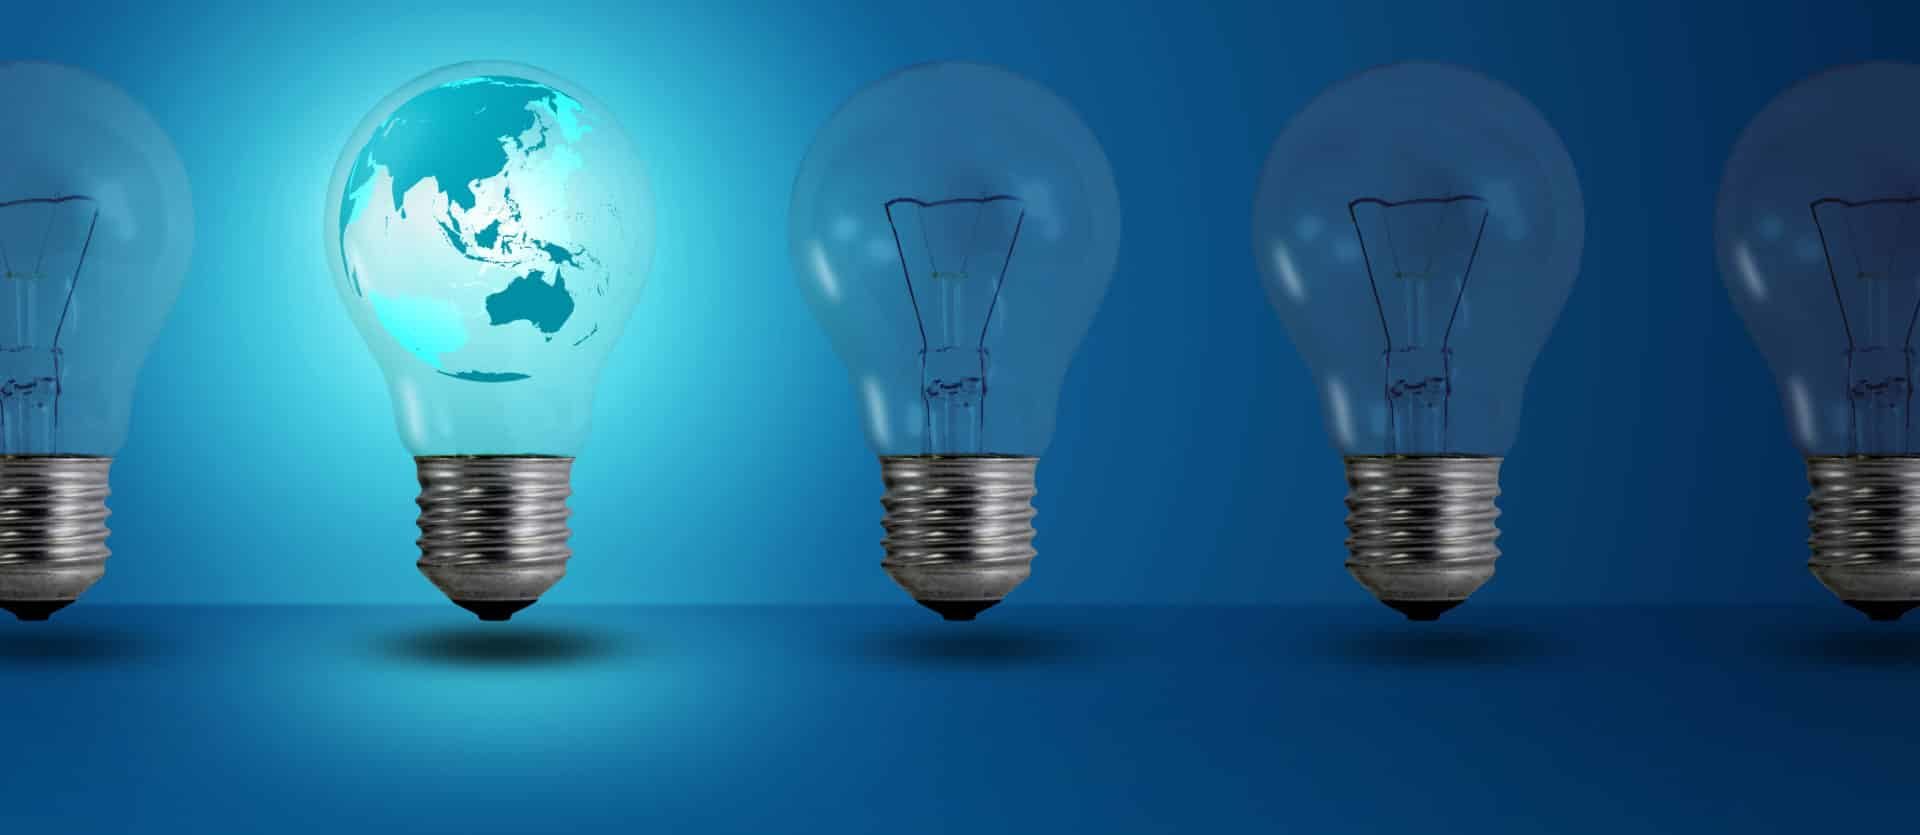 map inside glow among other light bulb on a blue background